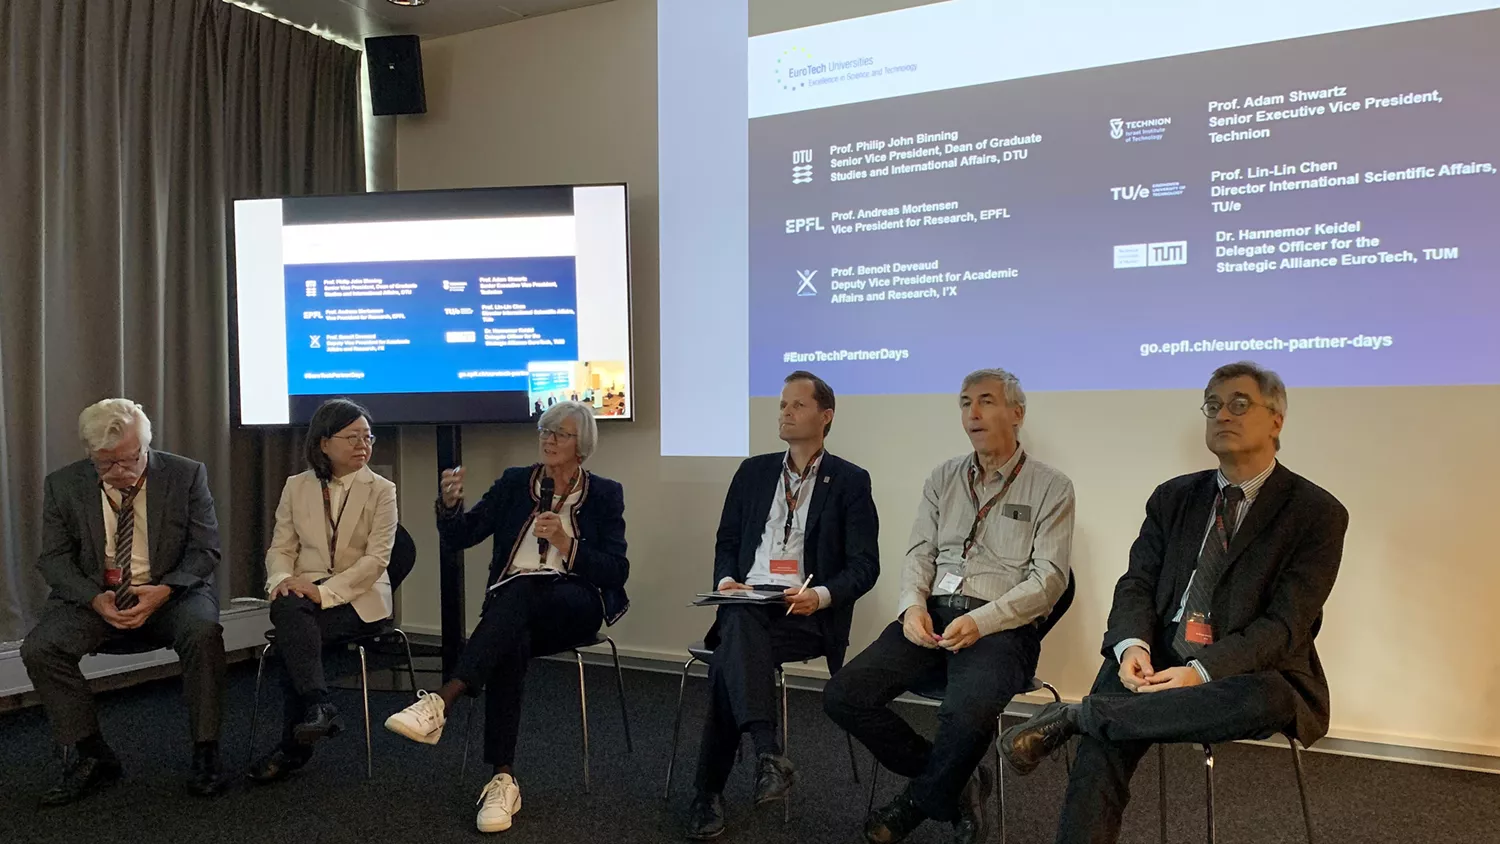 Six EuroTech vice presidents during a panel discussion at the Partner Days in Lausanne.